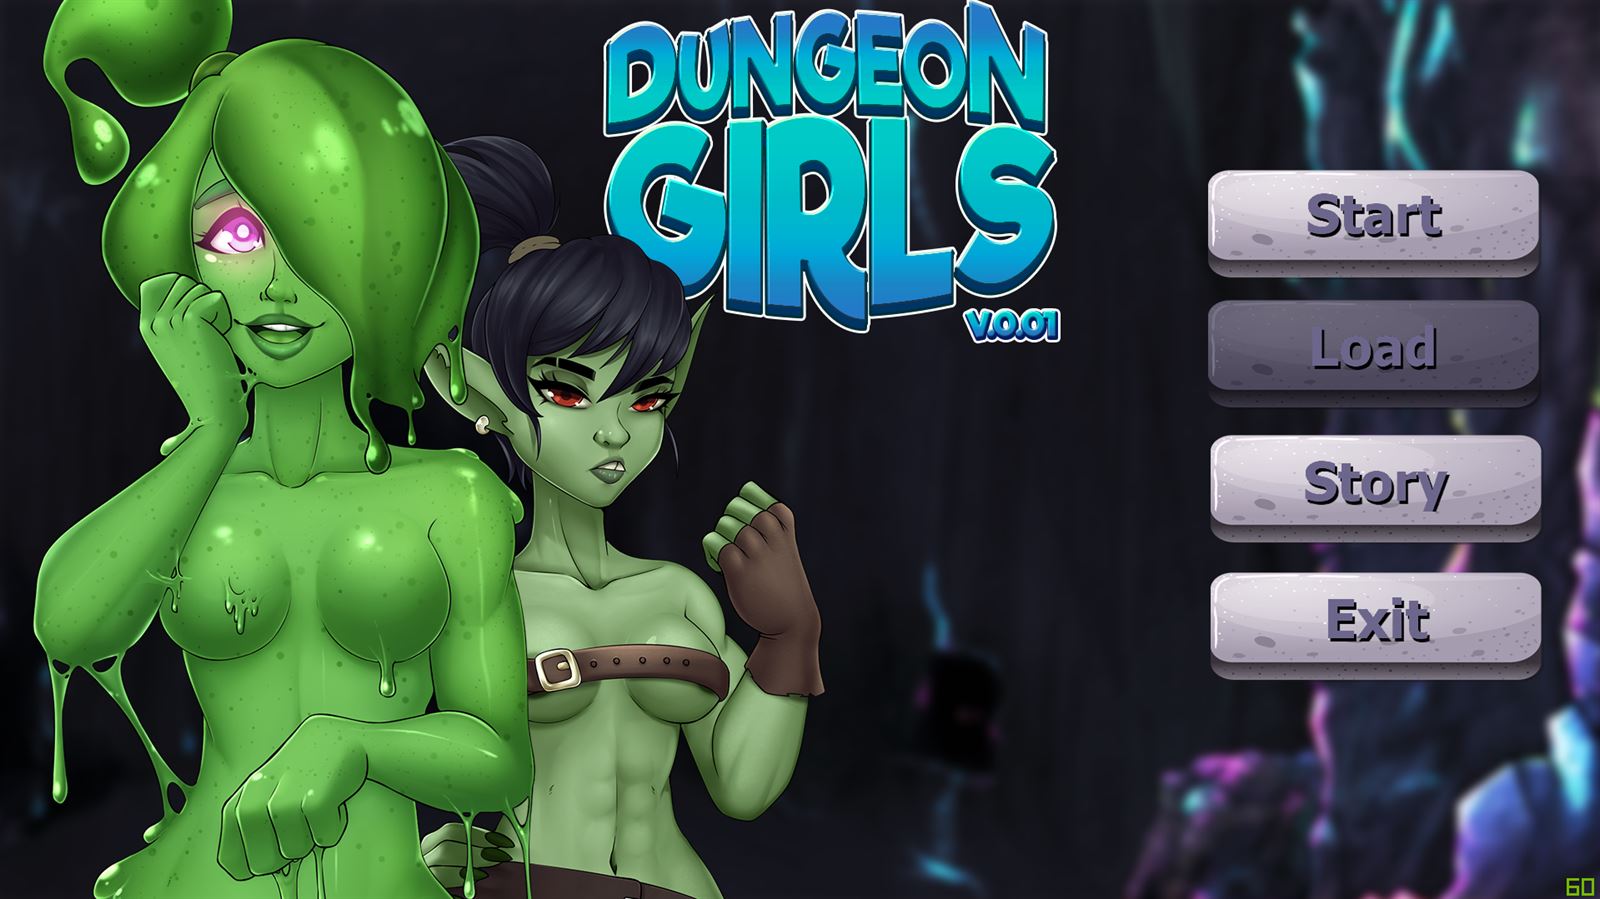 Game Porn Girls - Others] Dungeon Girls - v0.09 by Shadik 18+ Adult xxx Porn Game Download